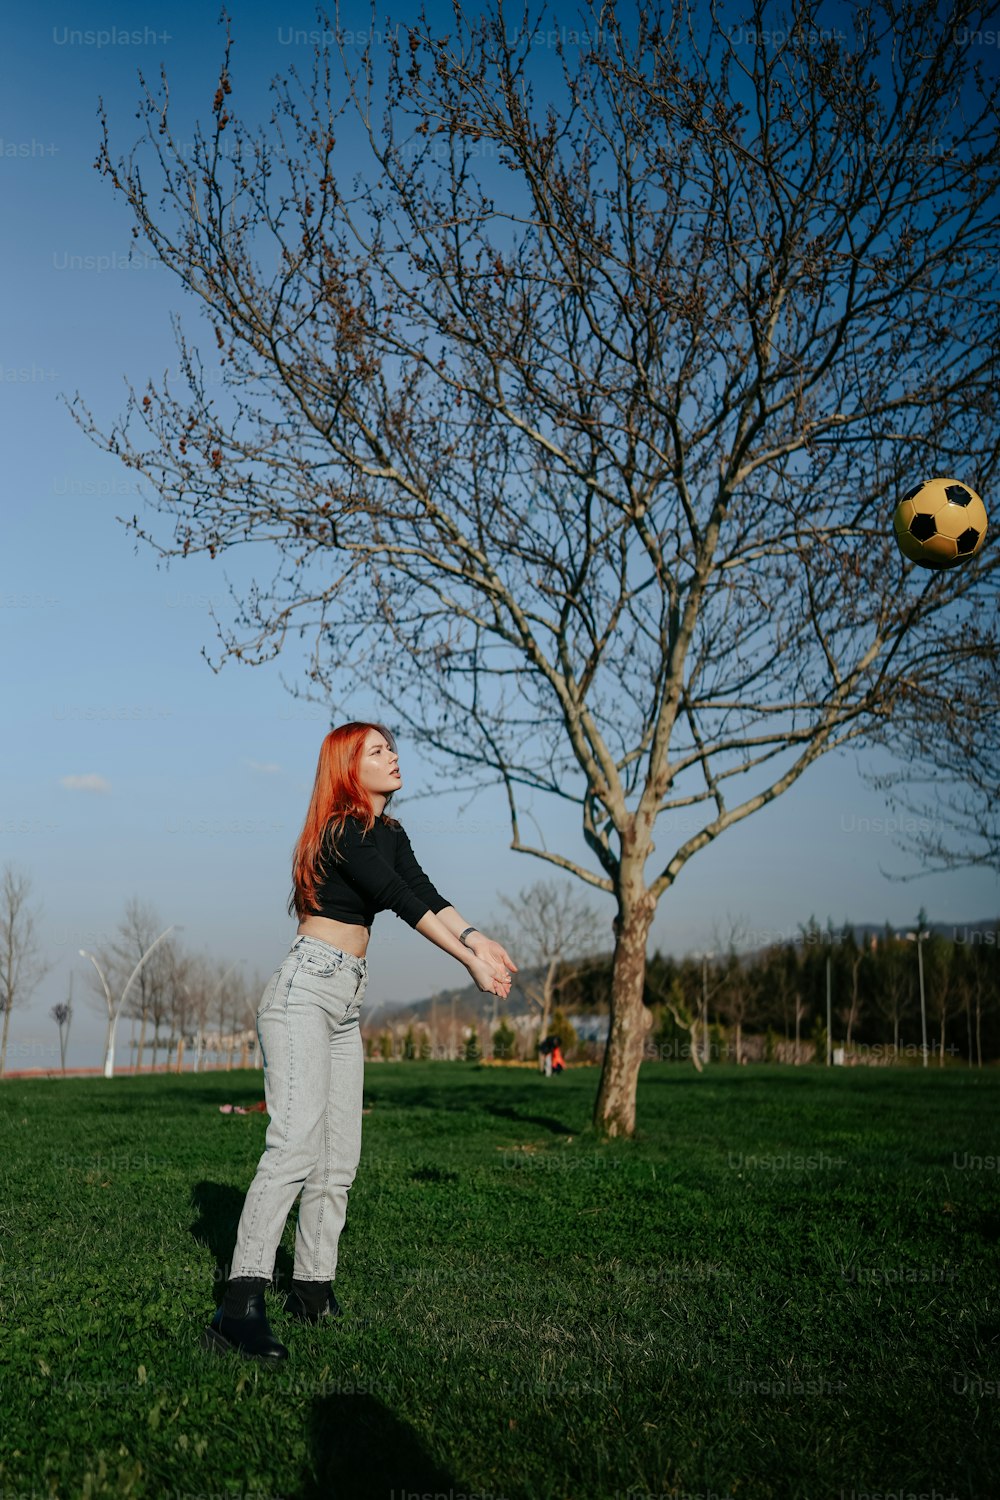 a woman is throwing a soccer ball in a field